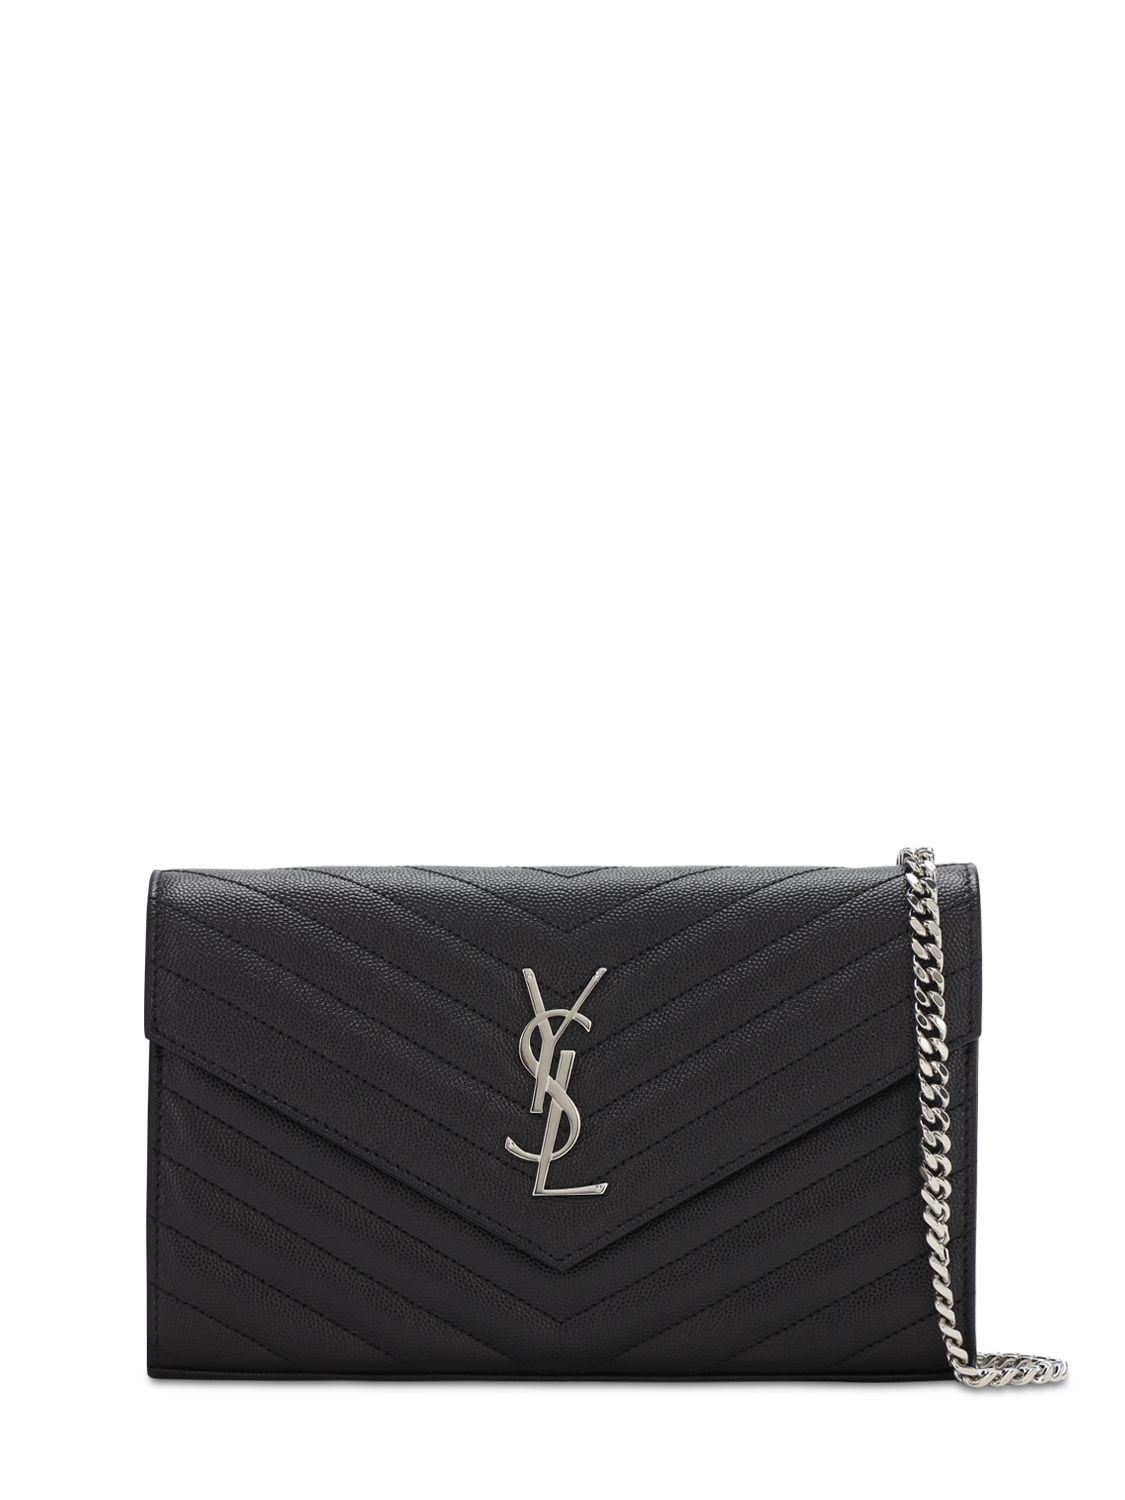 Image of Monogram Embossed Leather Chain Wallet